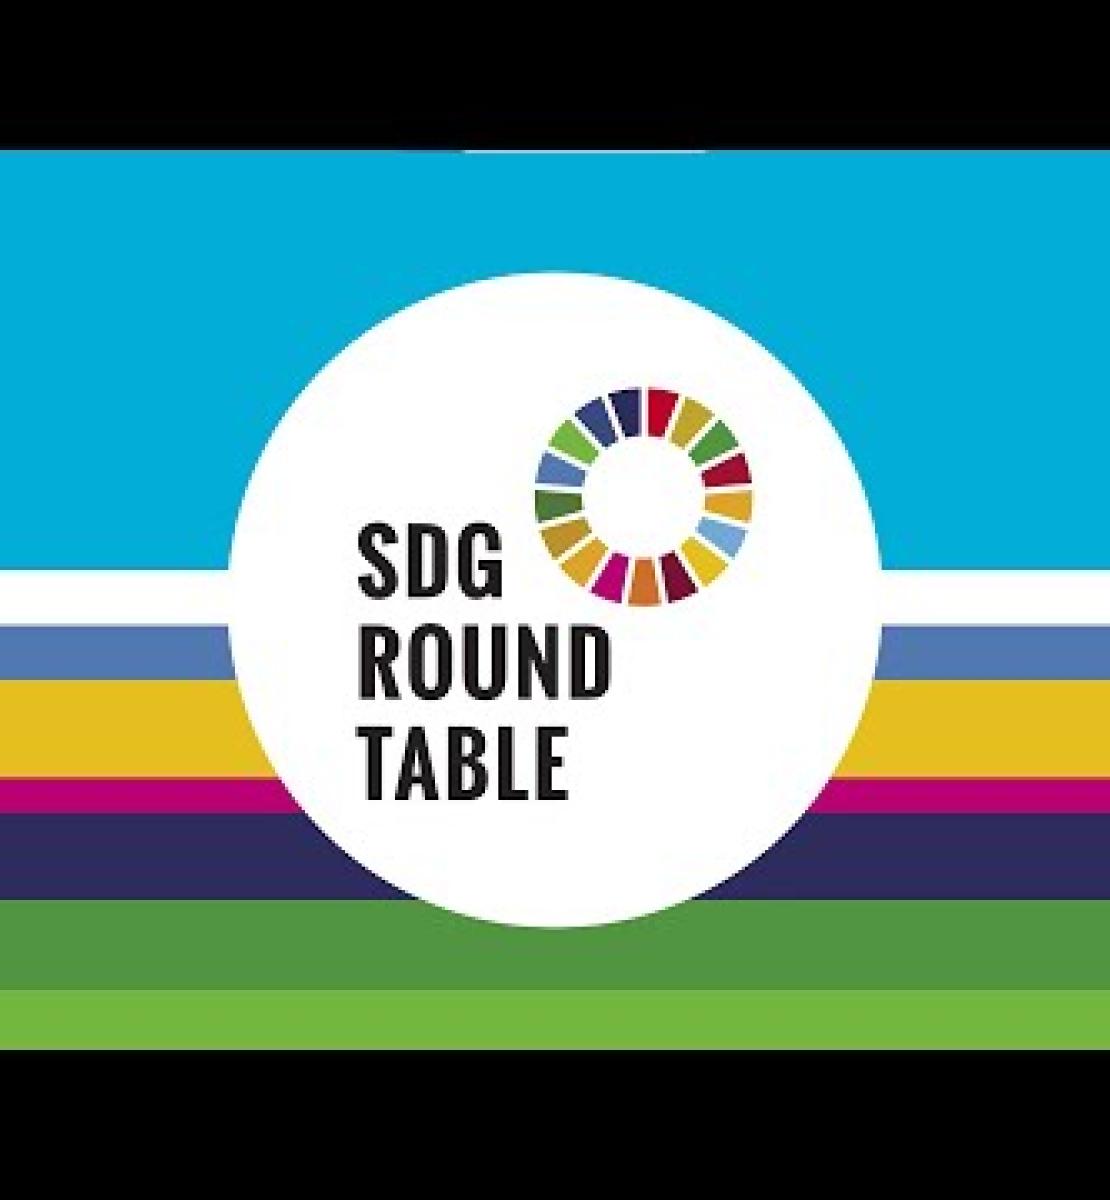 SDG Pre-Moment: UN Resident Coordinator Roundtable - 'Ambition, Whole-of-society, Trust, and Action'